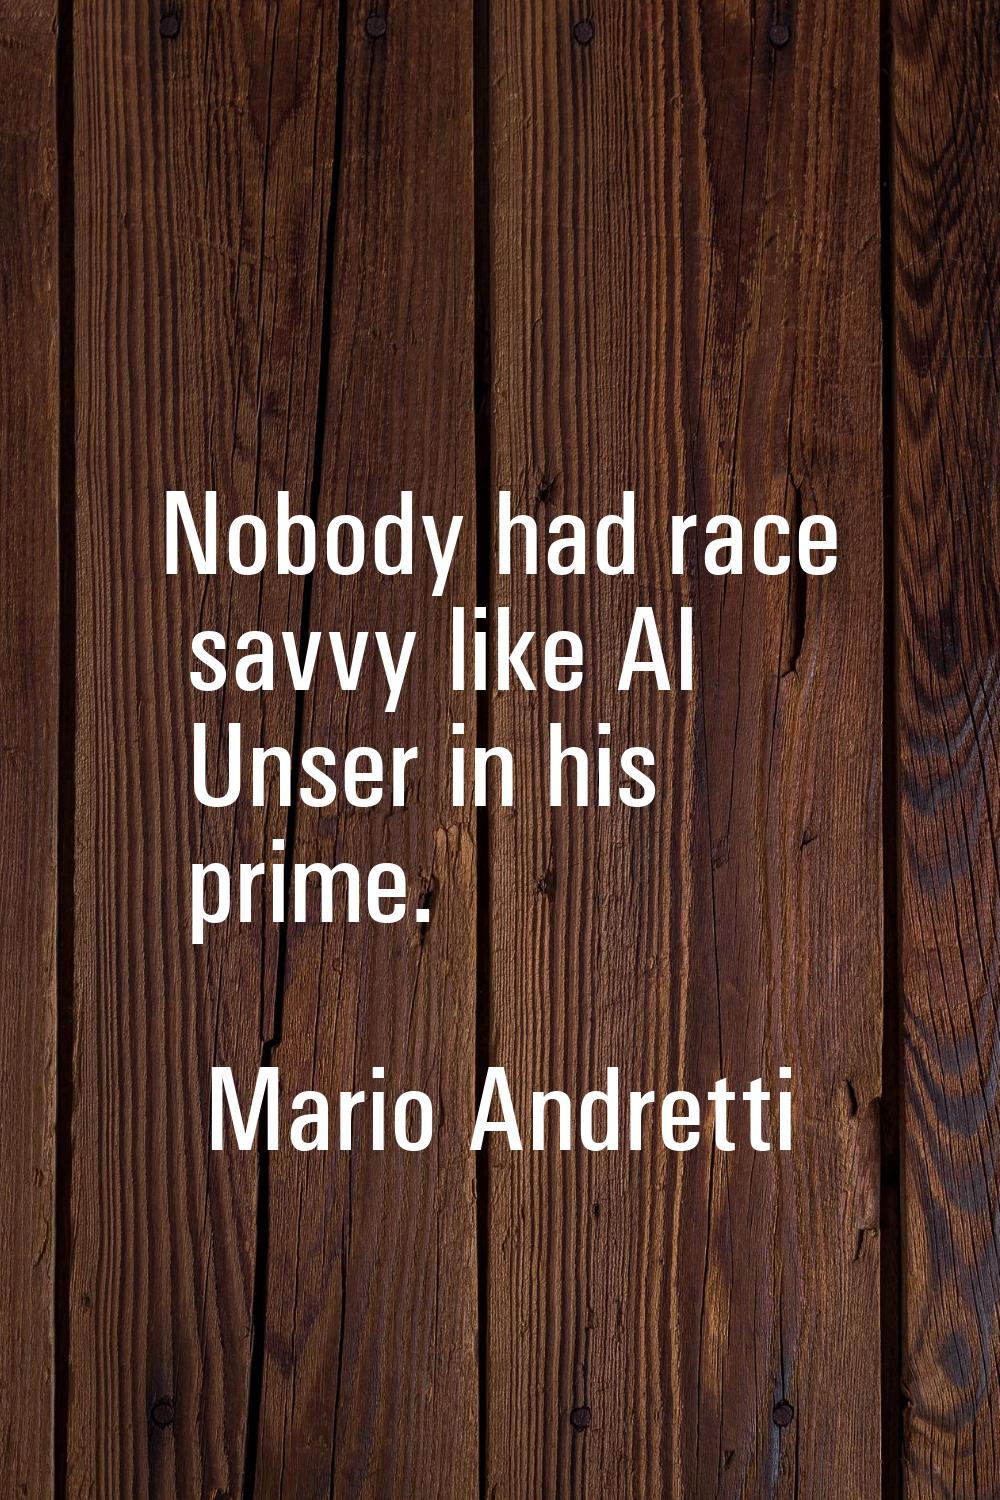 Nobody had race savvy like Al Unser in his prime.